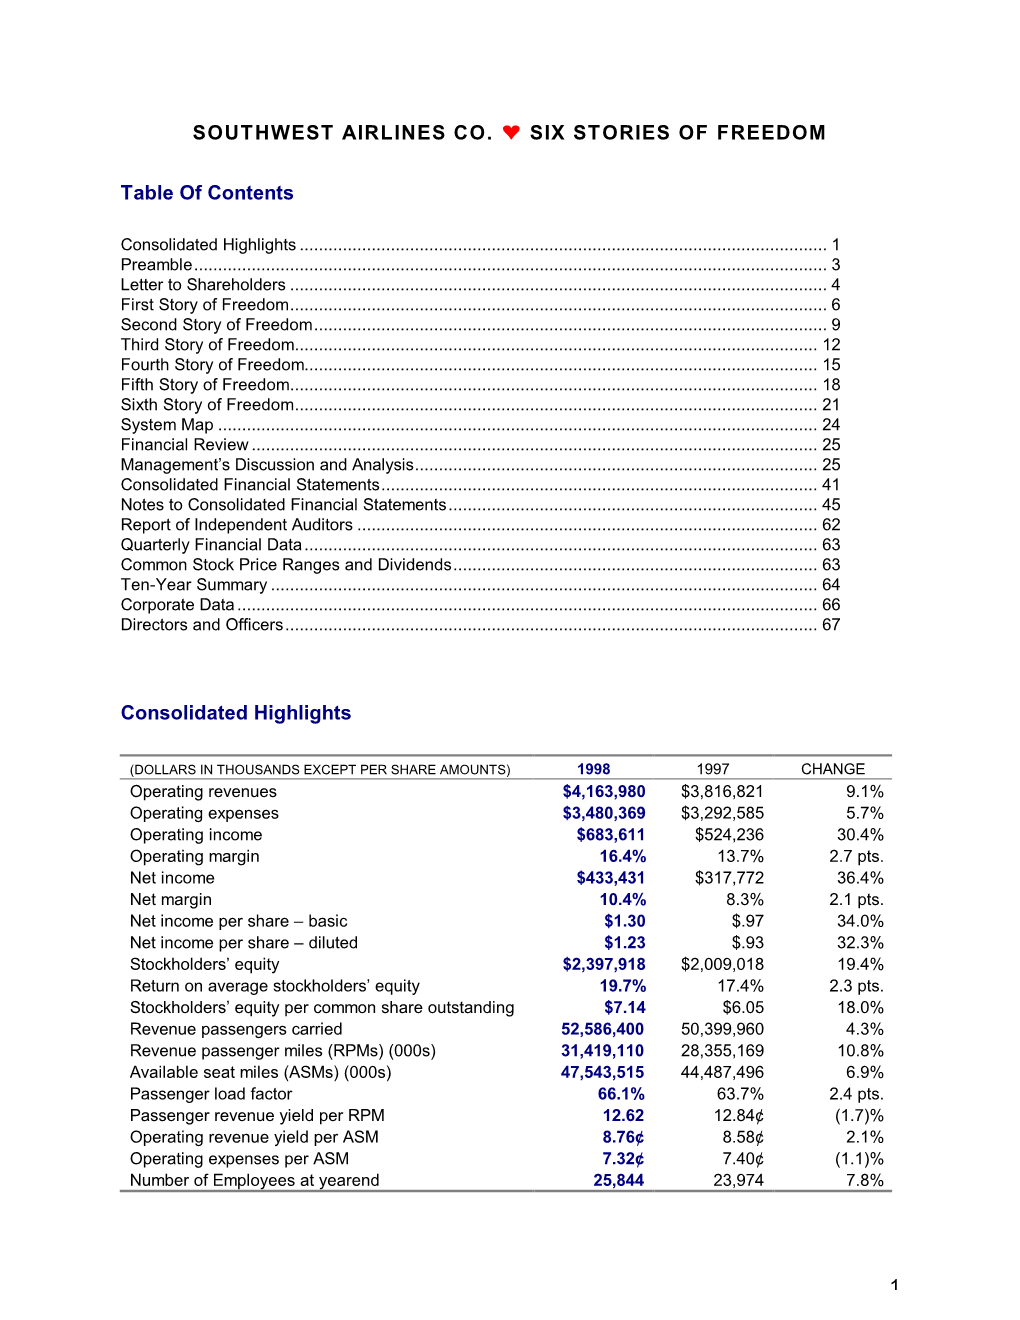 1 SOUTHWEST AIRLINES CO. SIX STORIES of FREEDOM Table of Contents Consolidated Highlights